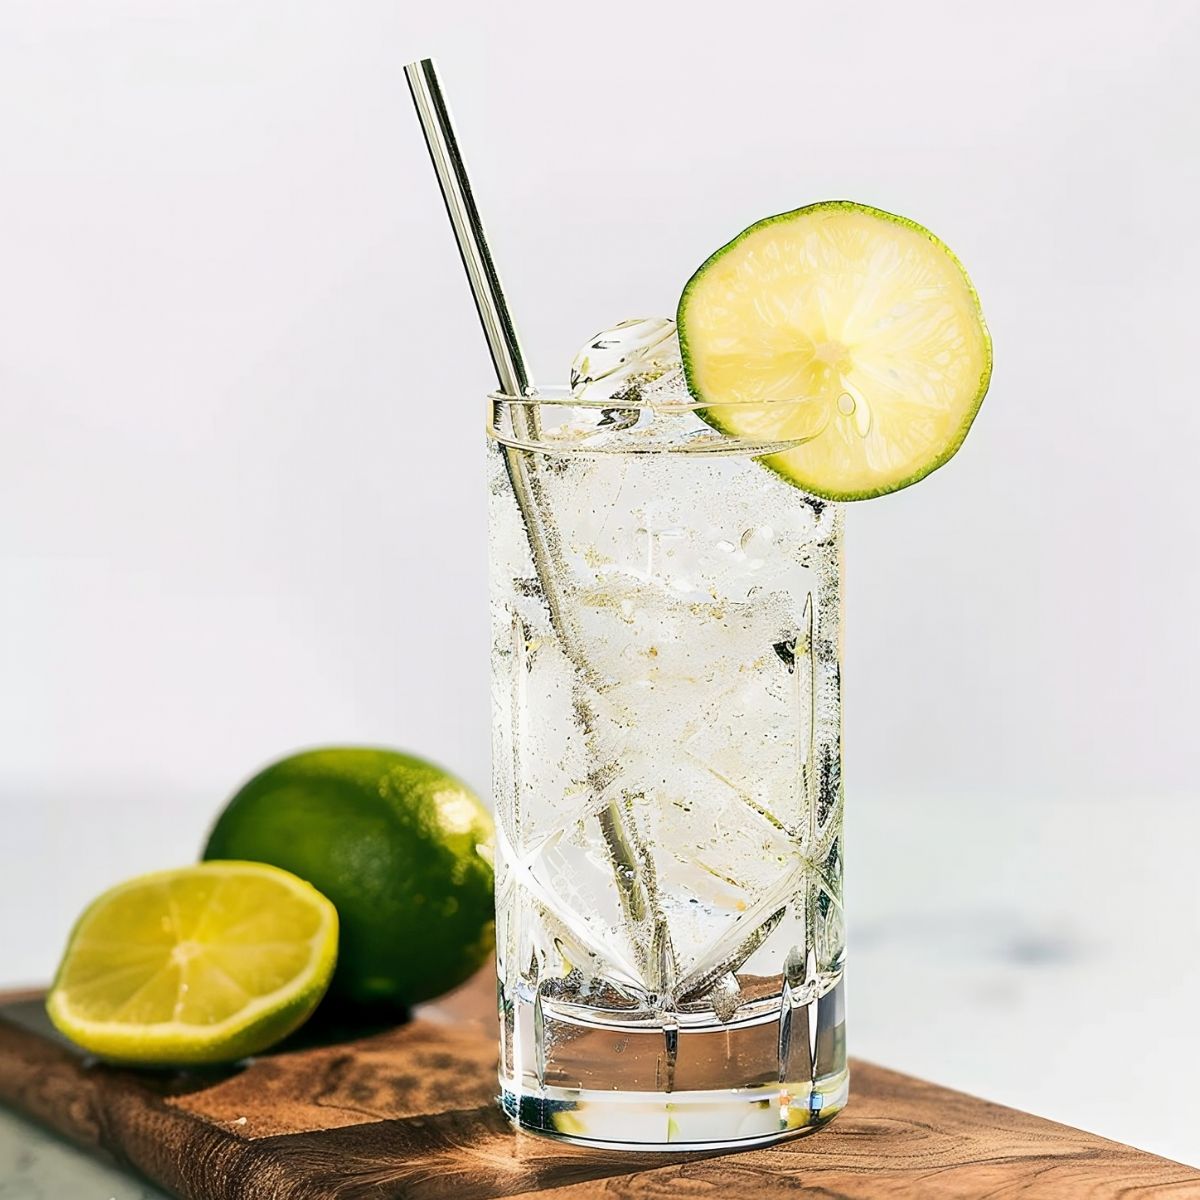 Glass of Sparkling, Refreshing Gin and Tonic with a Lime Wedge on a Wooden Cutting Board with Limes